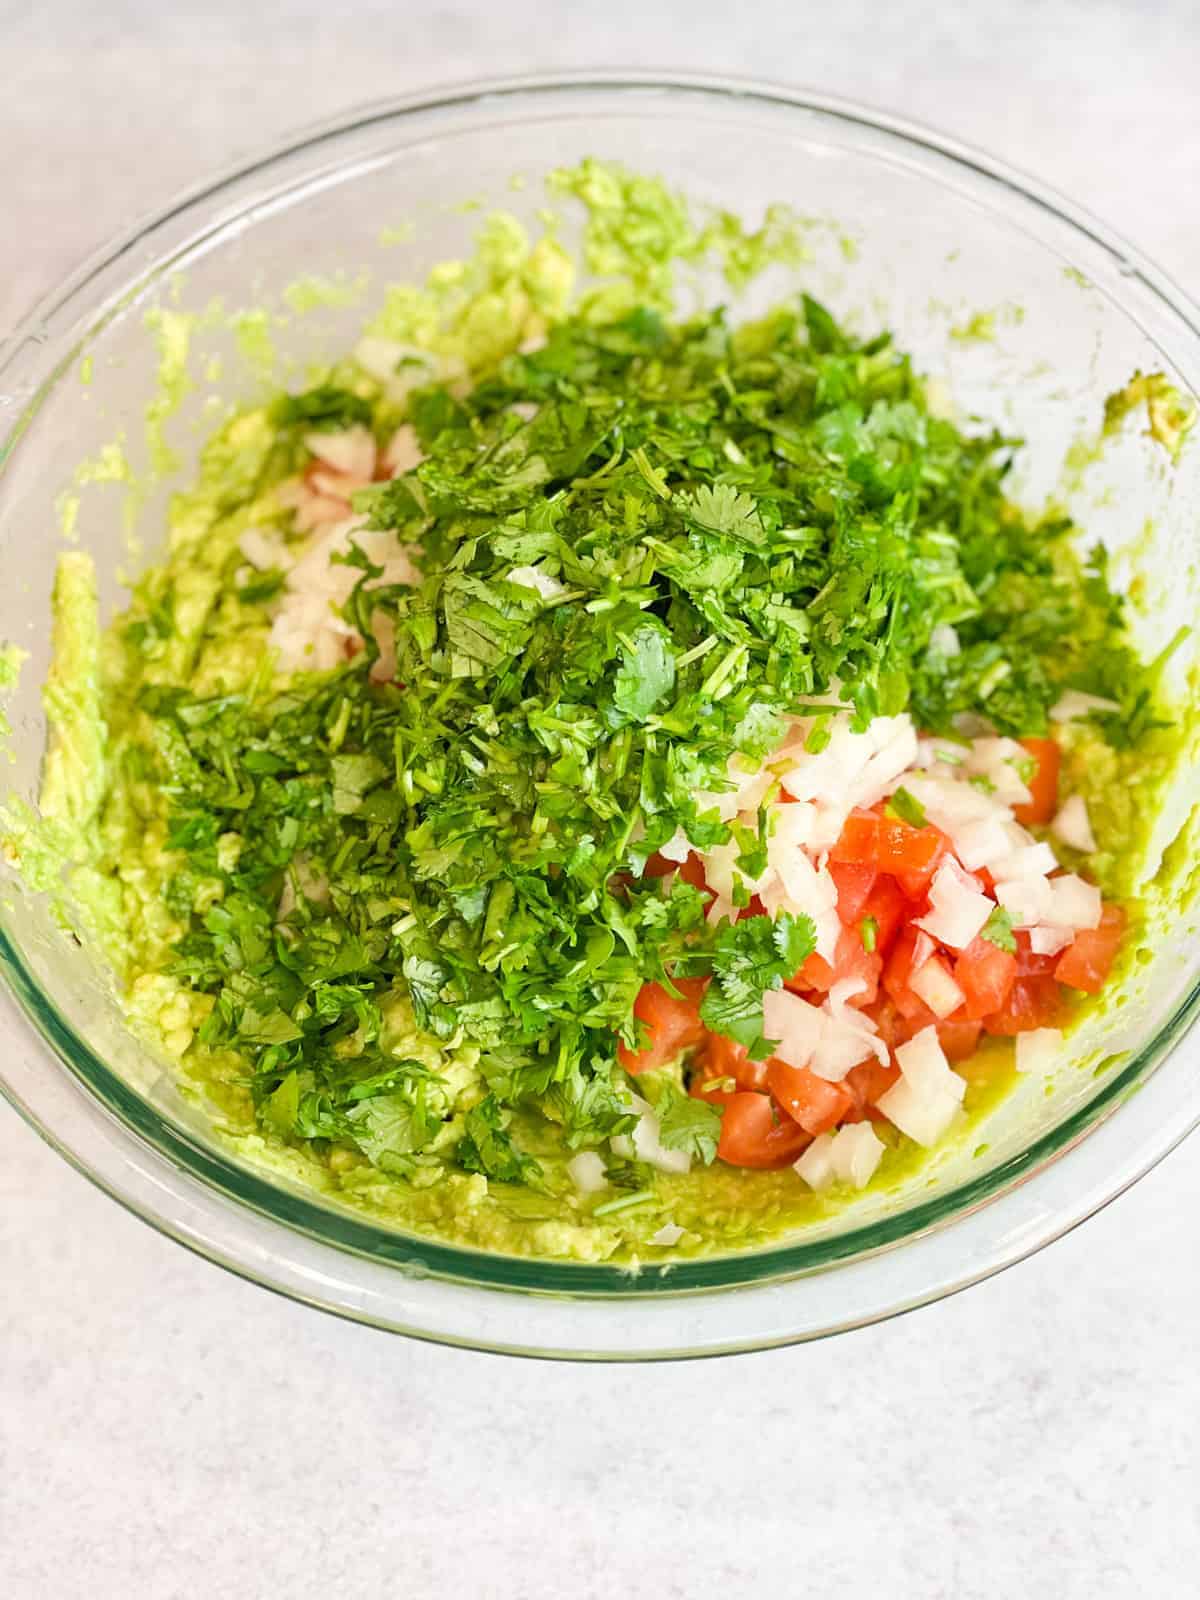 A bowl full of mashed avocadoes, slices of tomatoes and onions, and parsley.